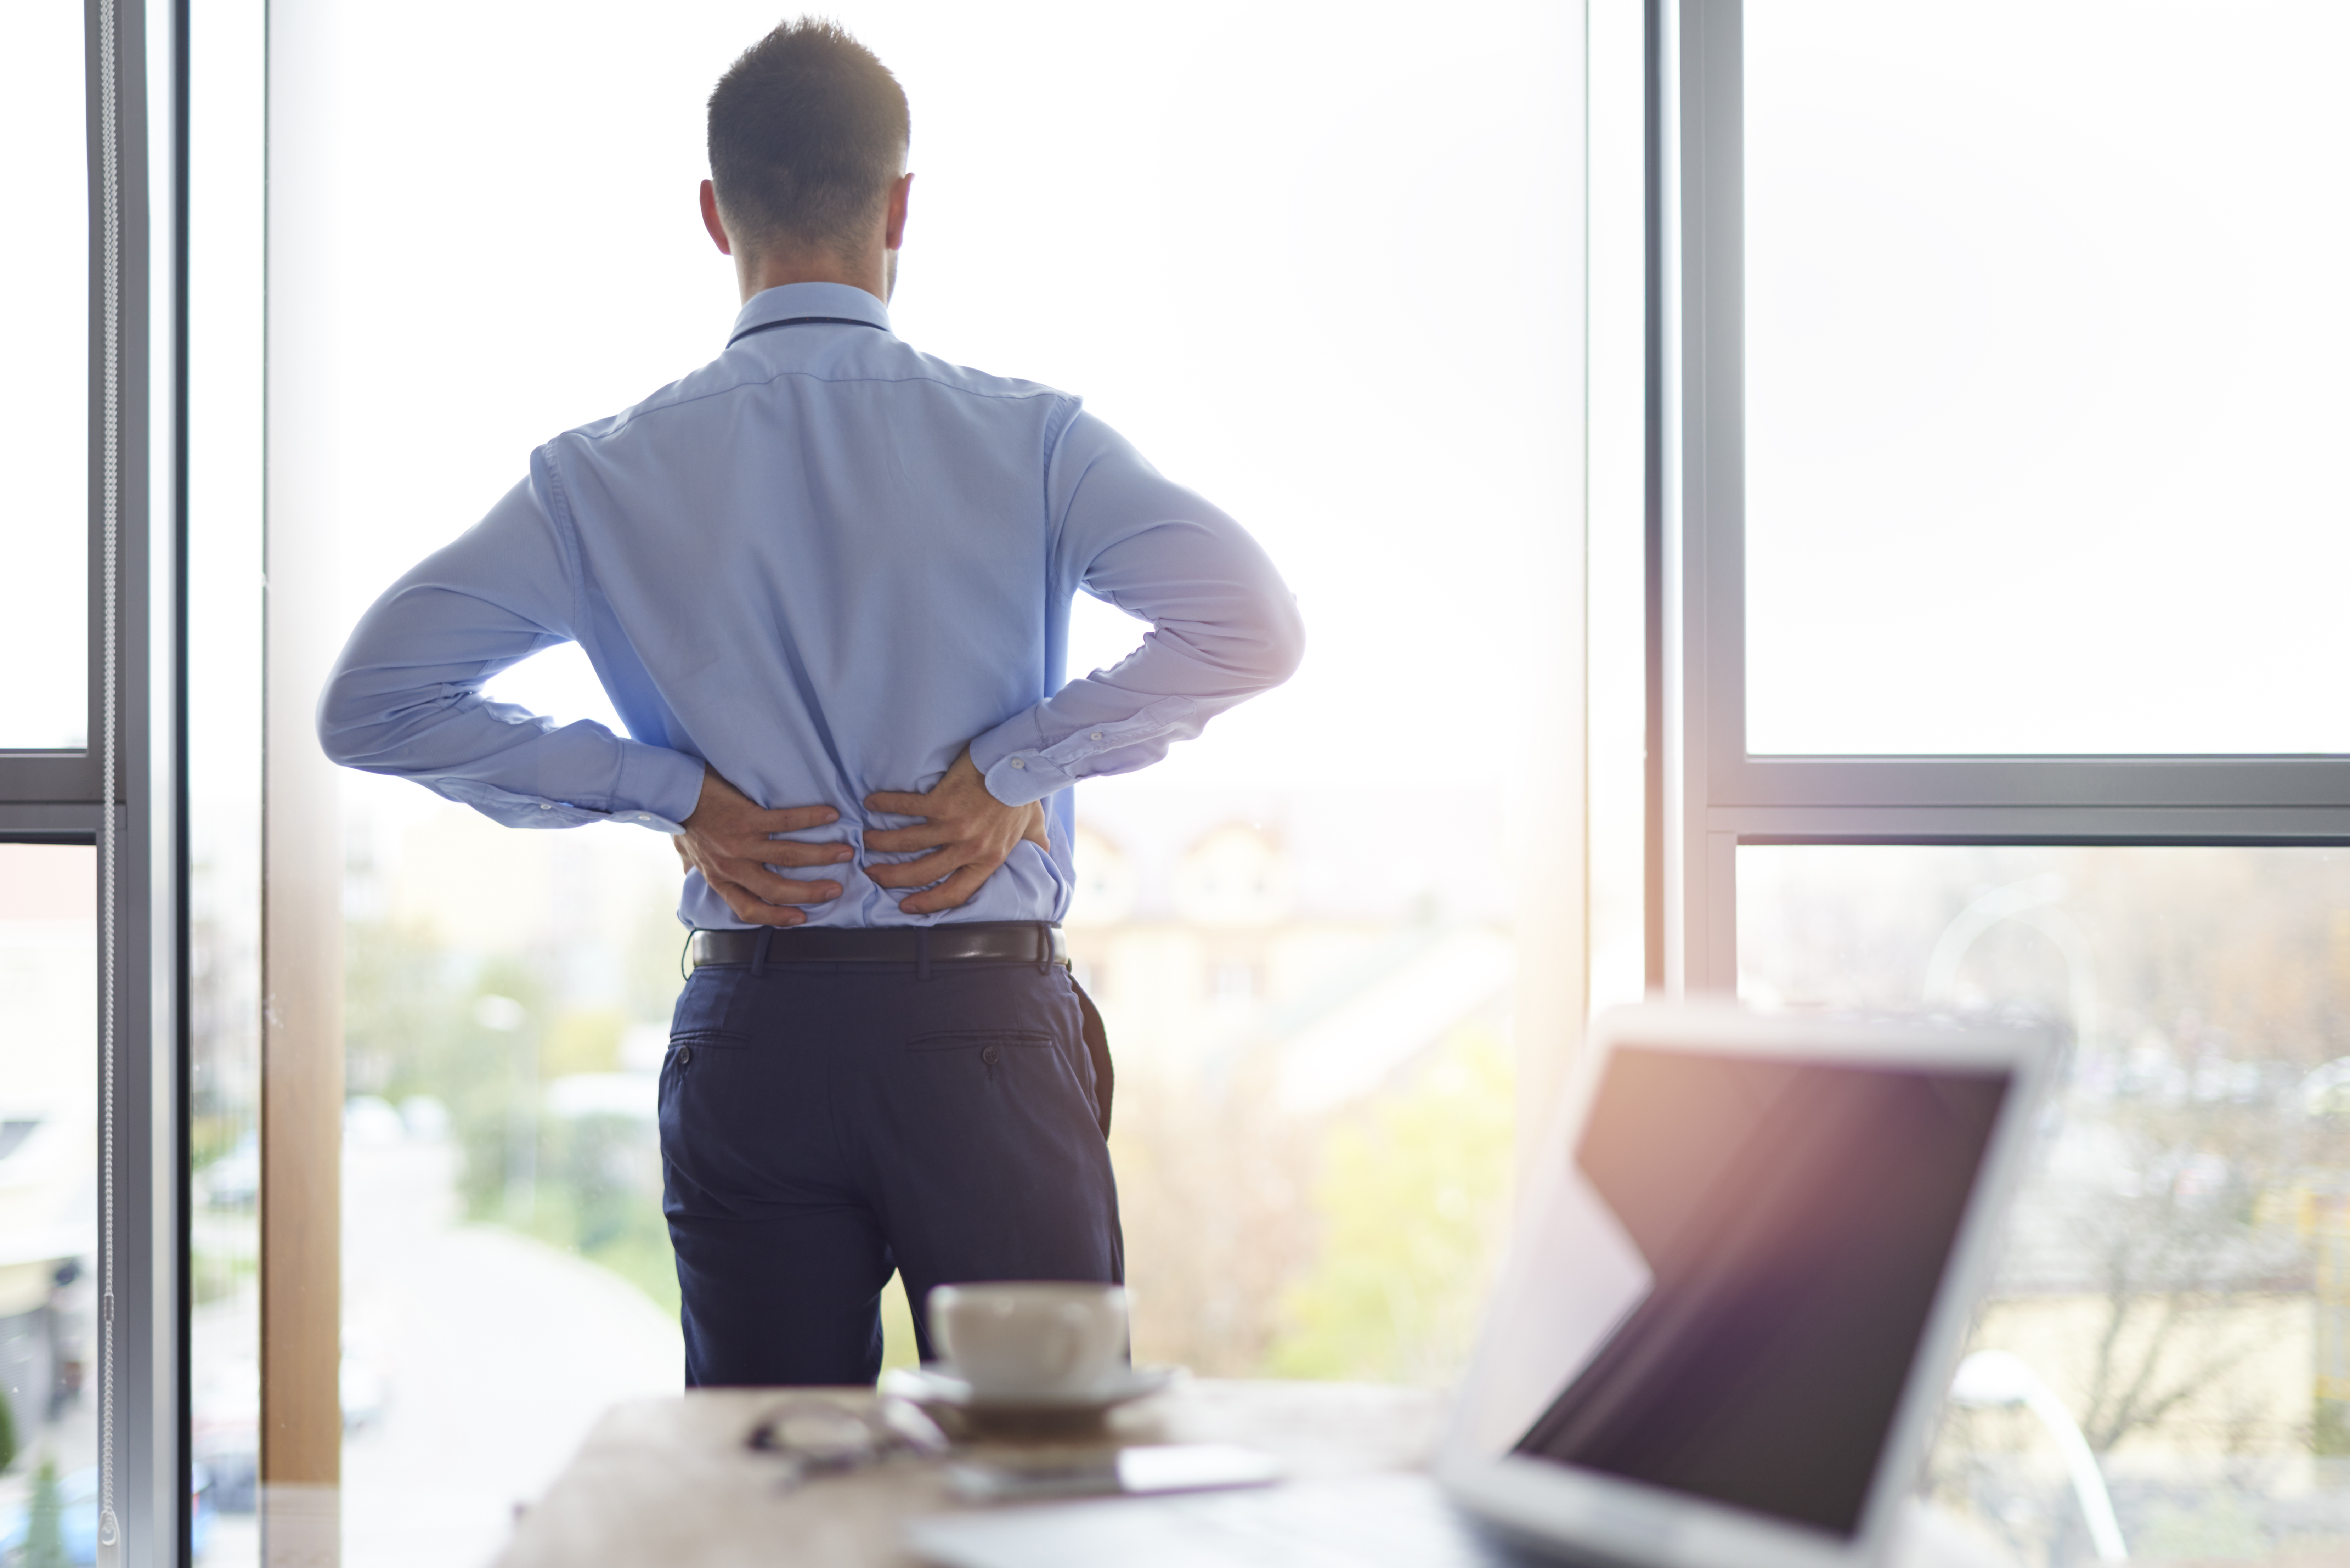 Tips for Less Back Pain While Sitting at a Desk All Day